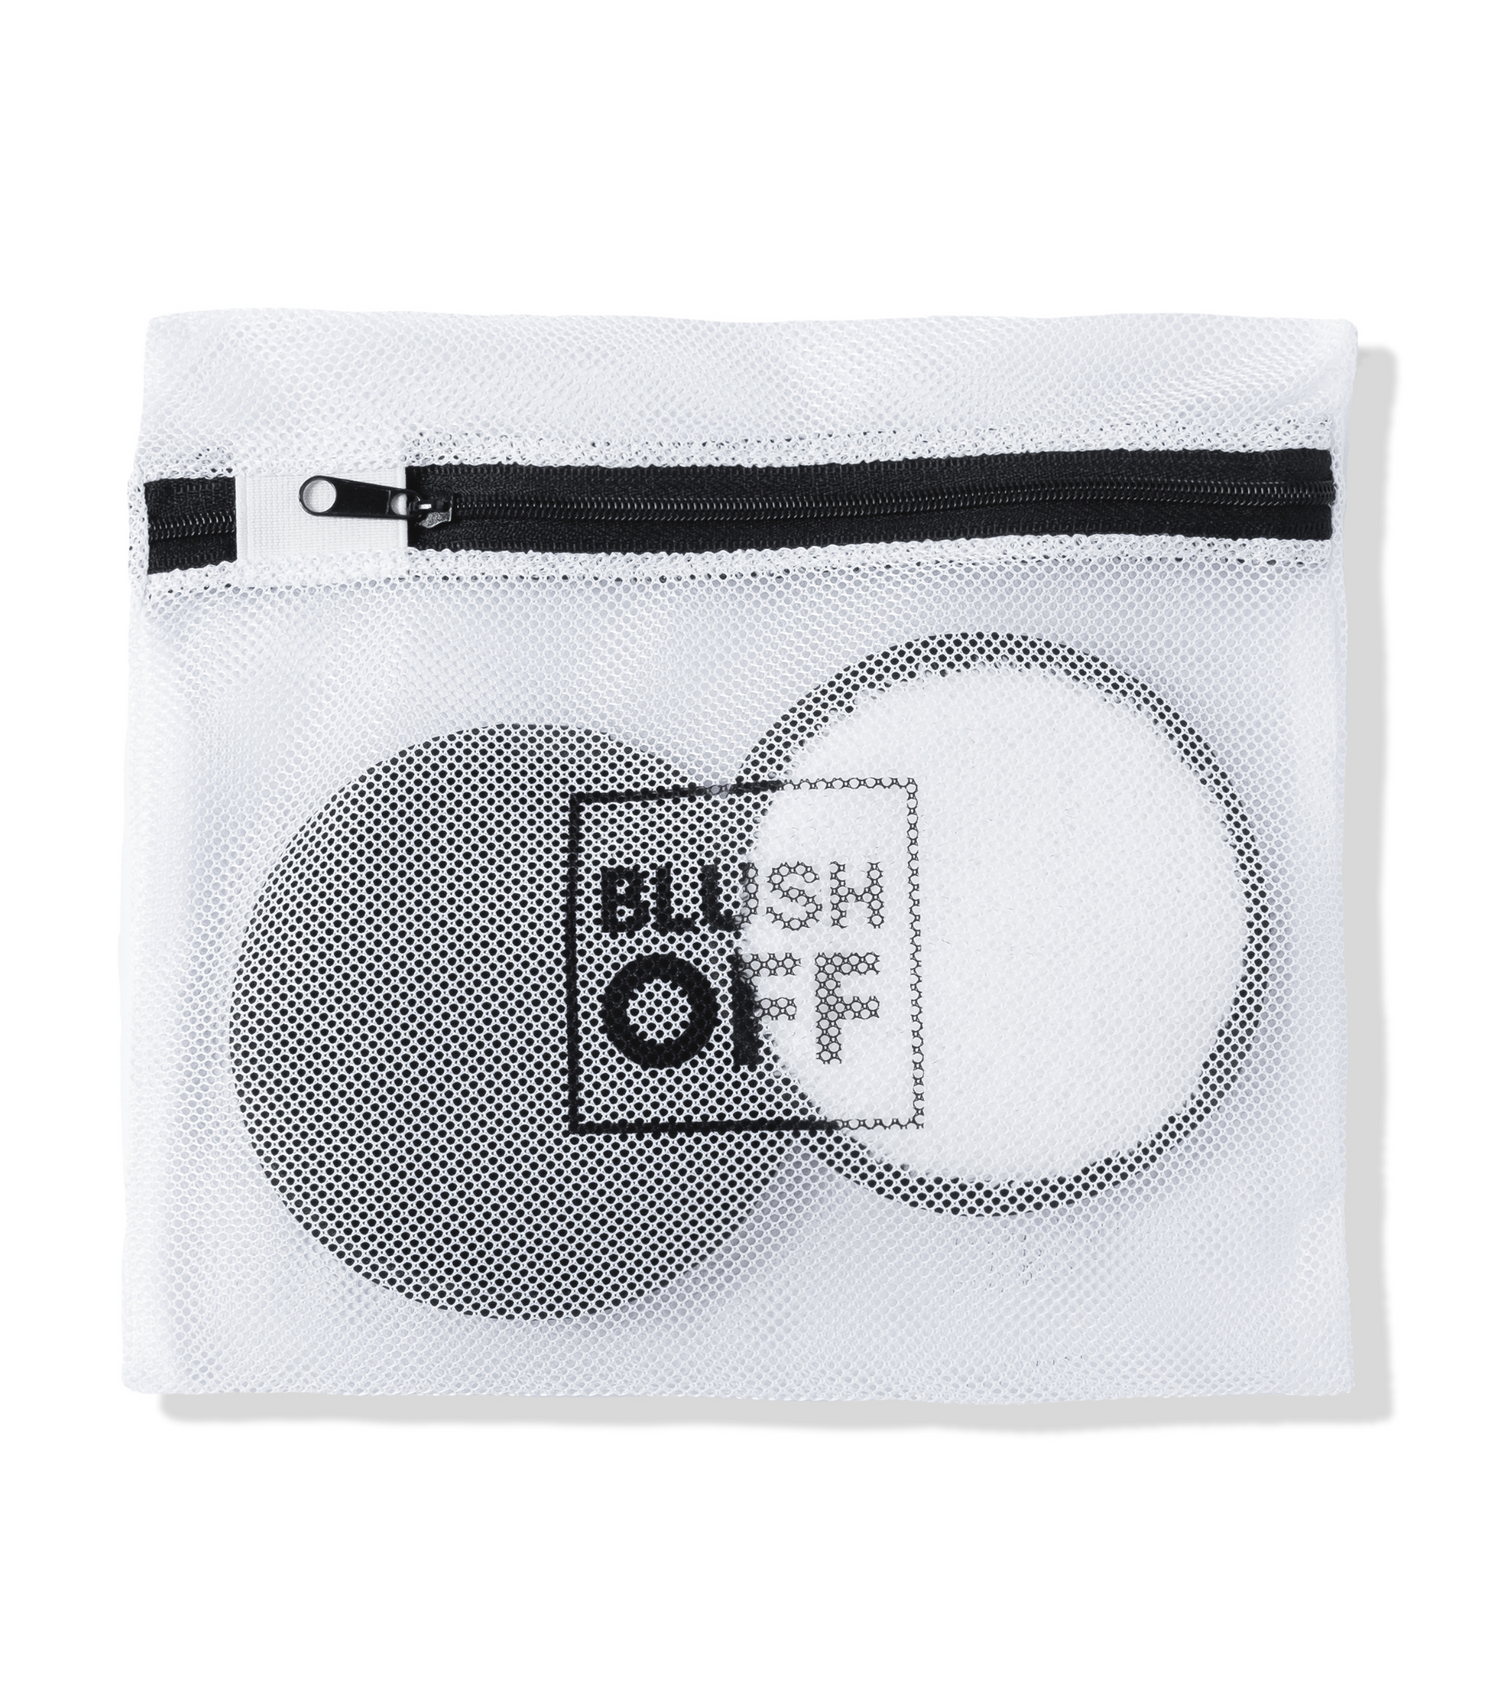 Laundry Wash Bag - Blush Off - Eco Friendly Makeup Remover - FREE EXPRESS SHIPPING  